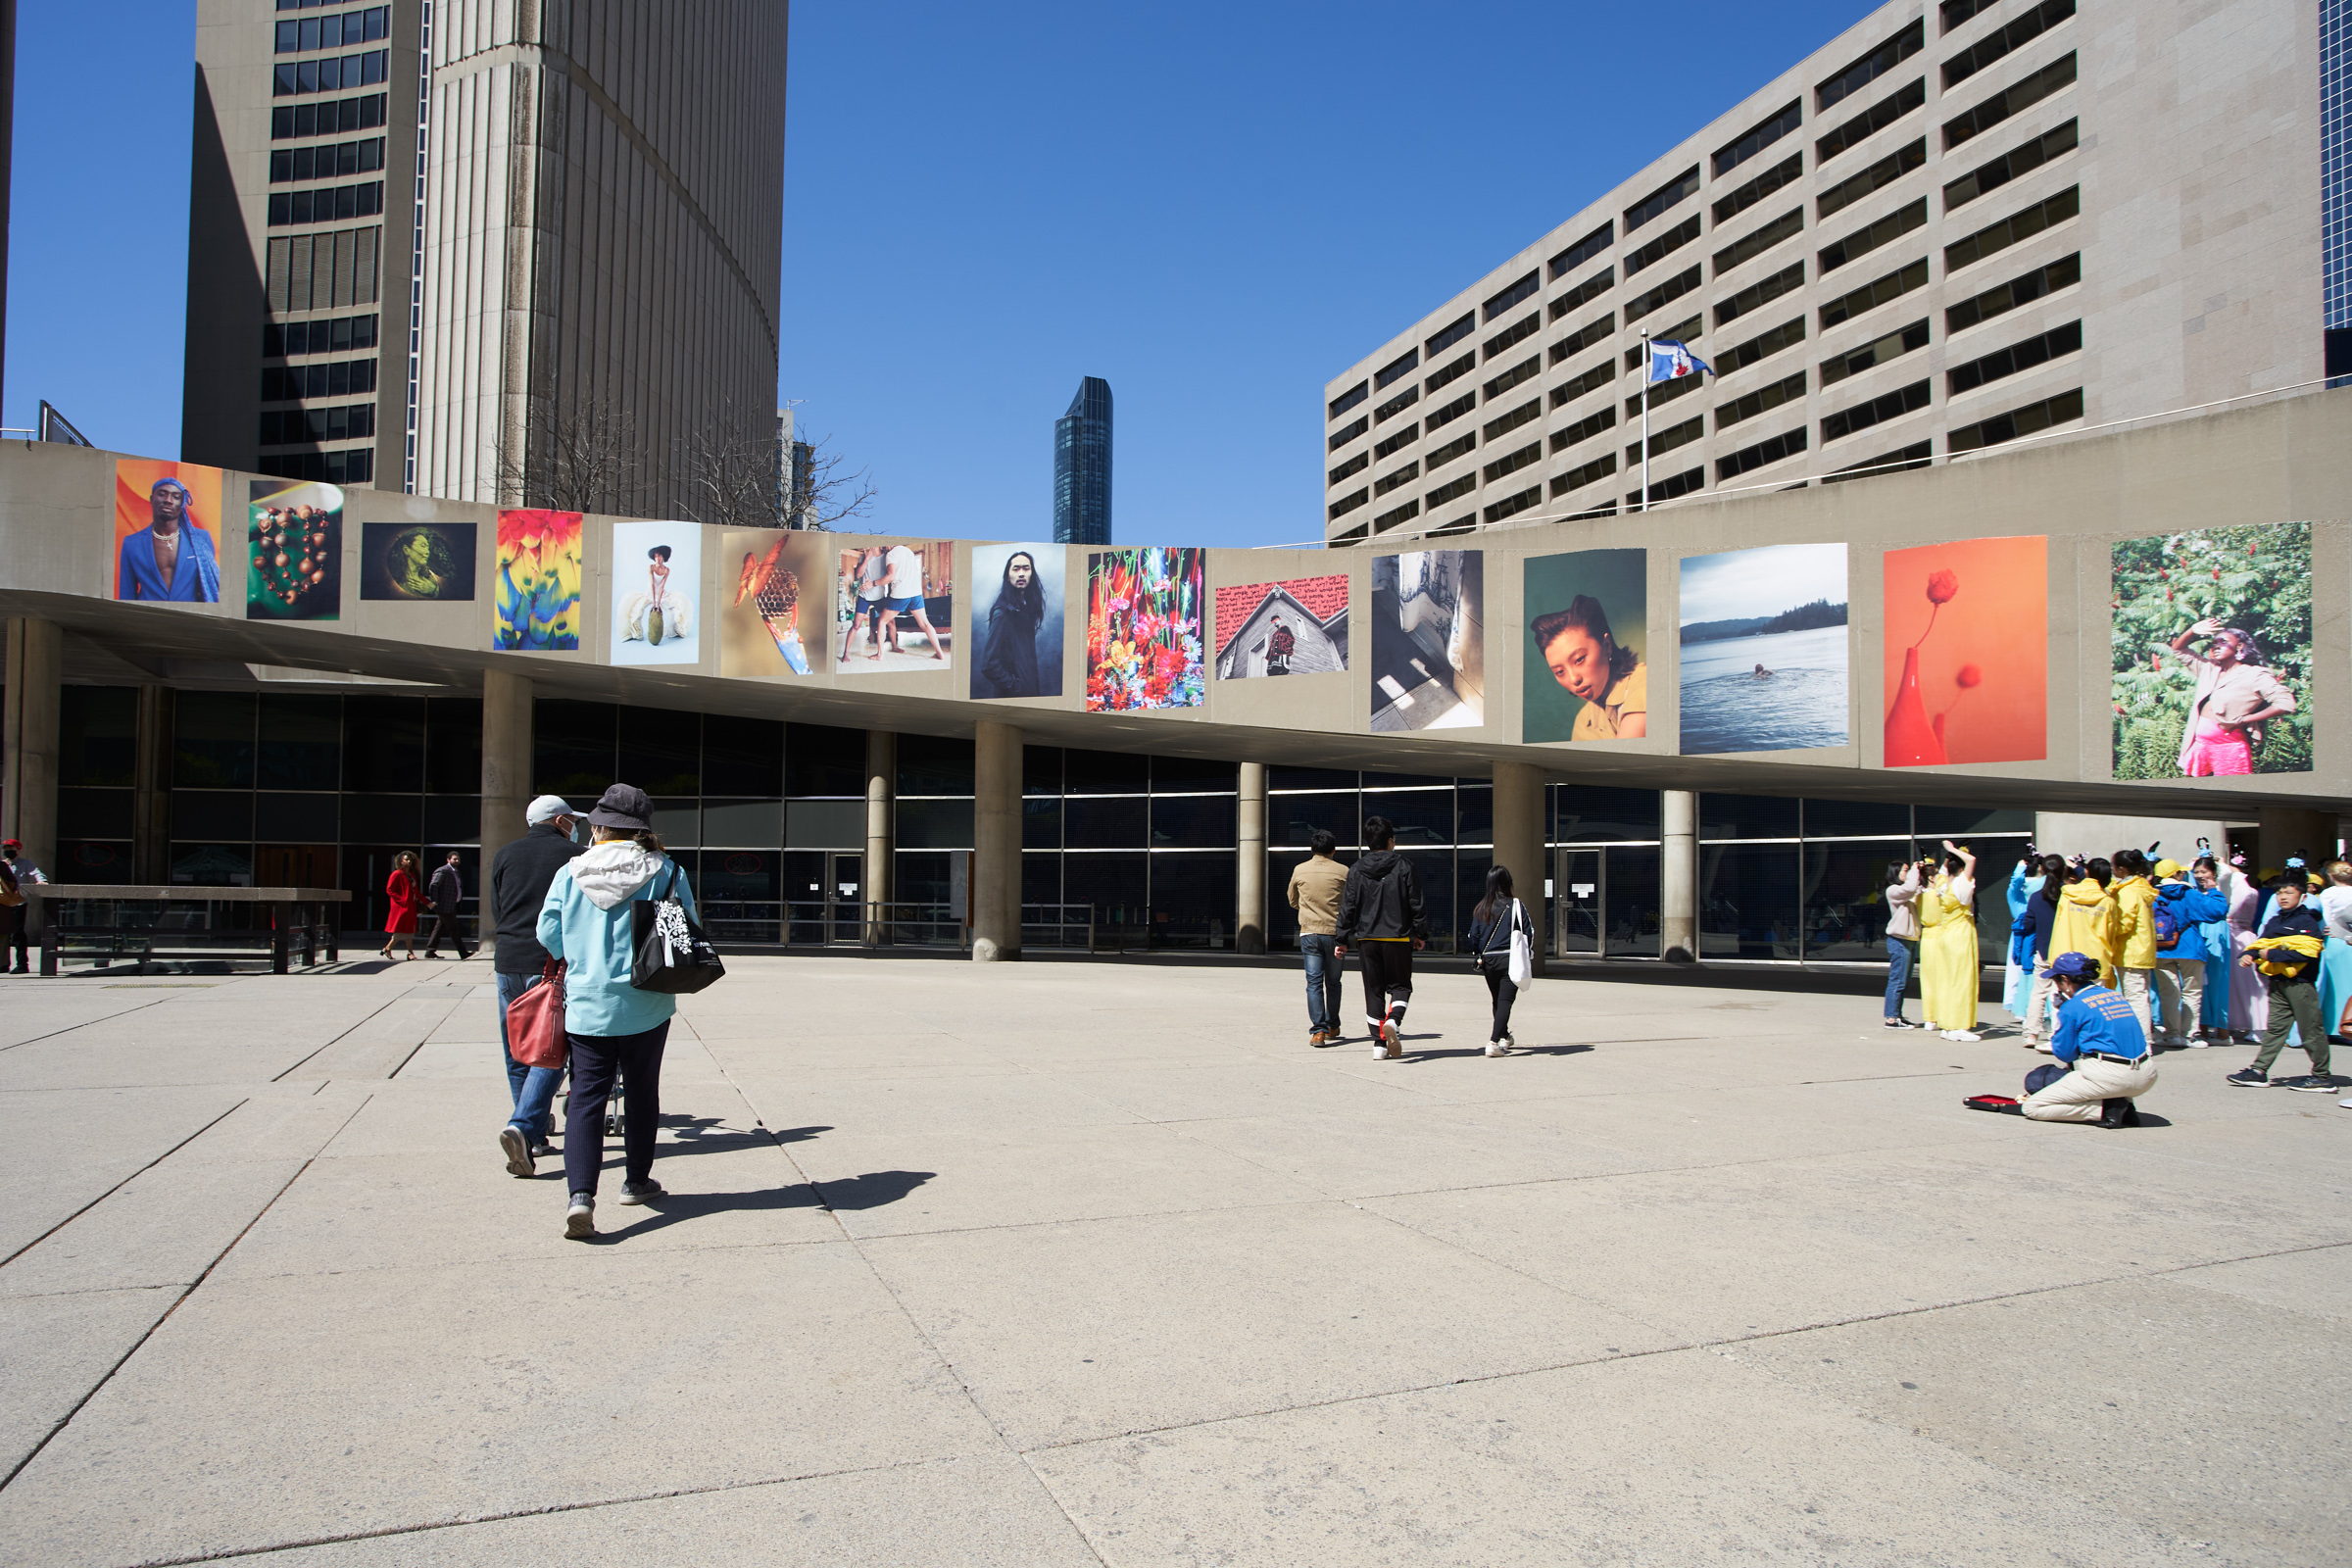     Group exhibition, Shine On: Photographs from The BIPOC Photo Mentorship Program, installation view, Nathan Philips Square, 2022. Courtesy of the artists and BPM

